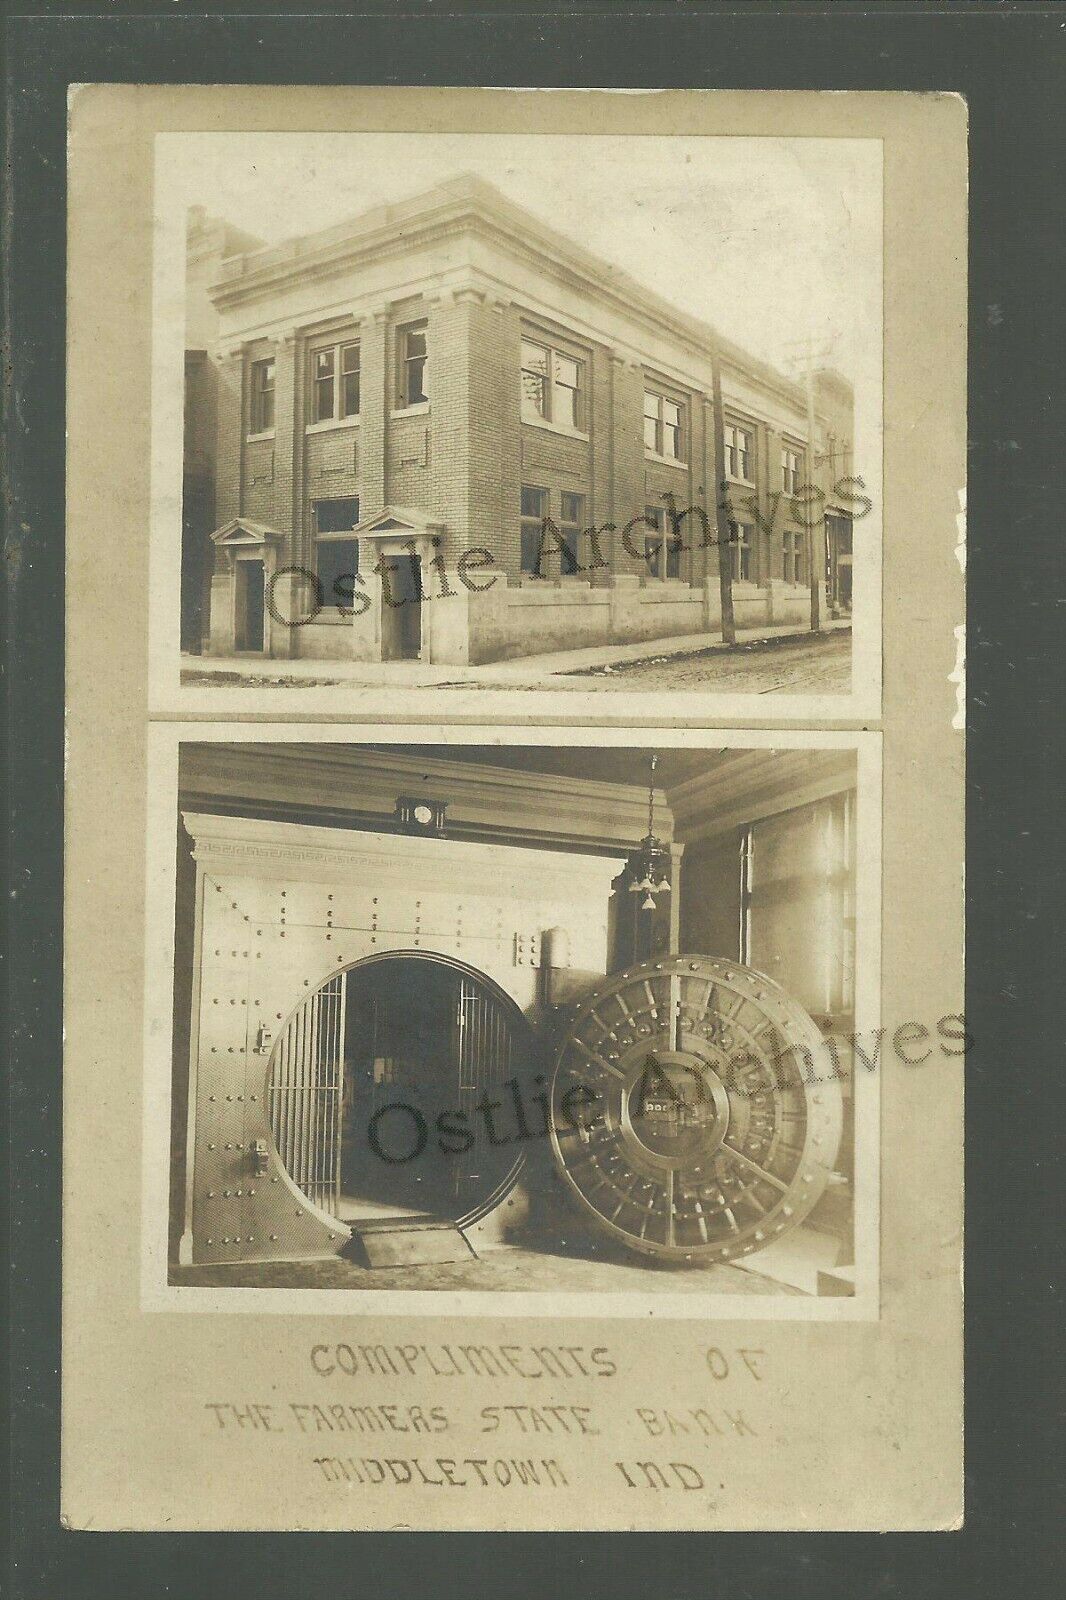 Middletown INDIANA RPPC c1908 ADVERTISING Farmers State Bank VAULT nr Anderson